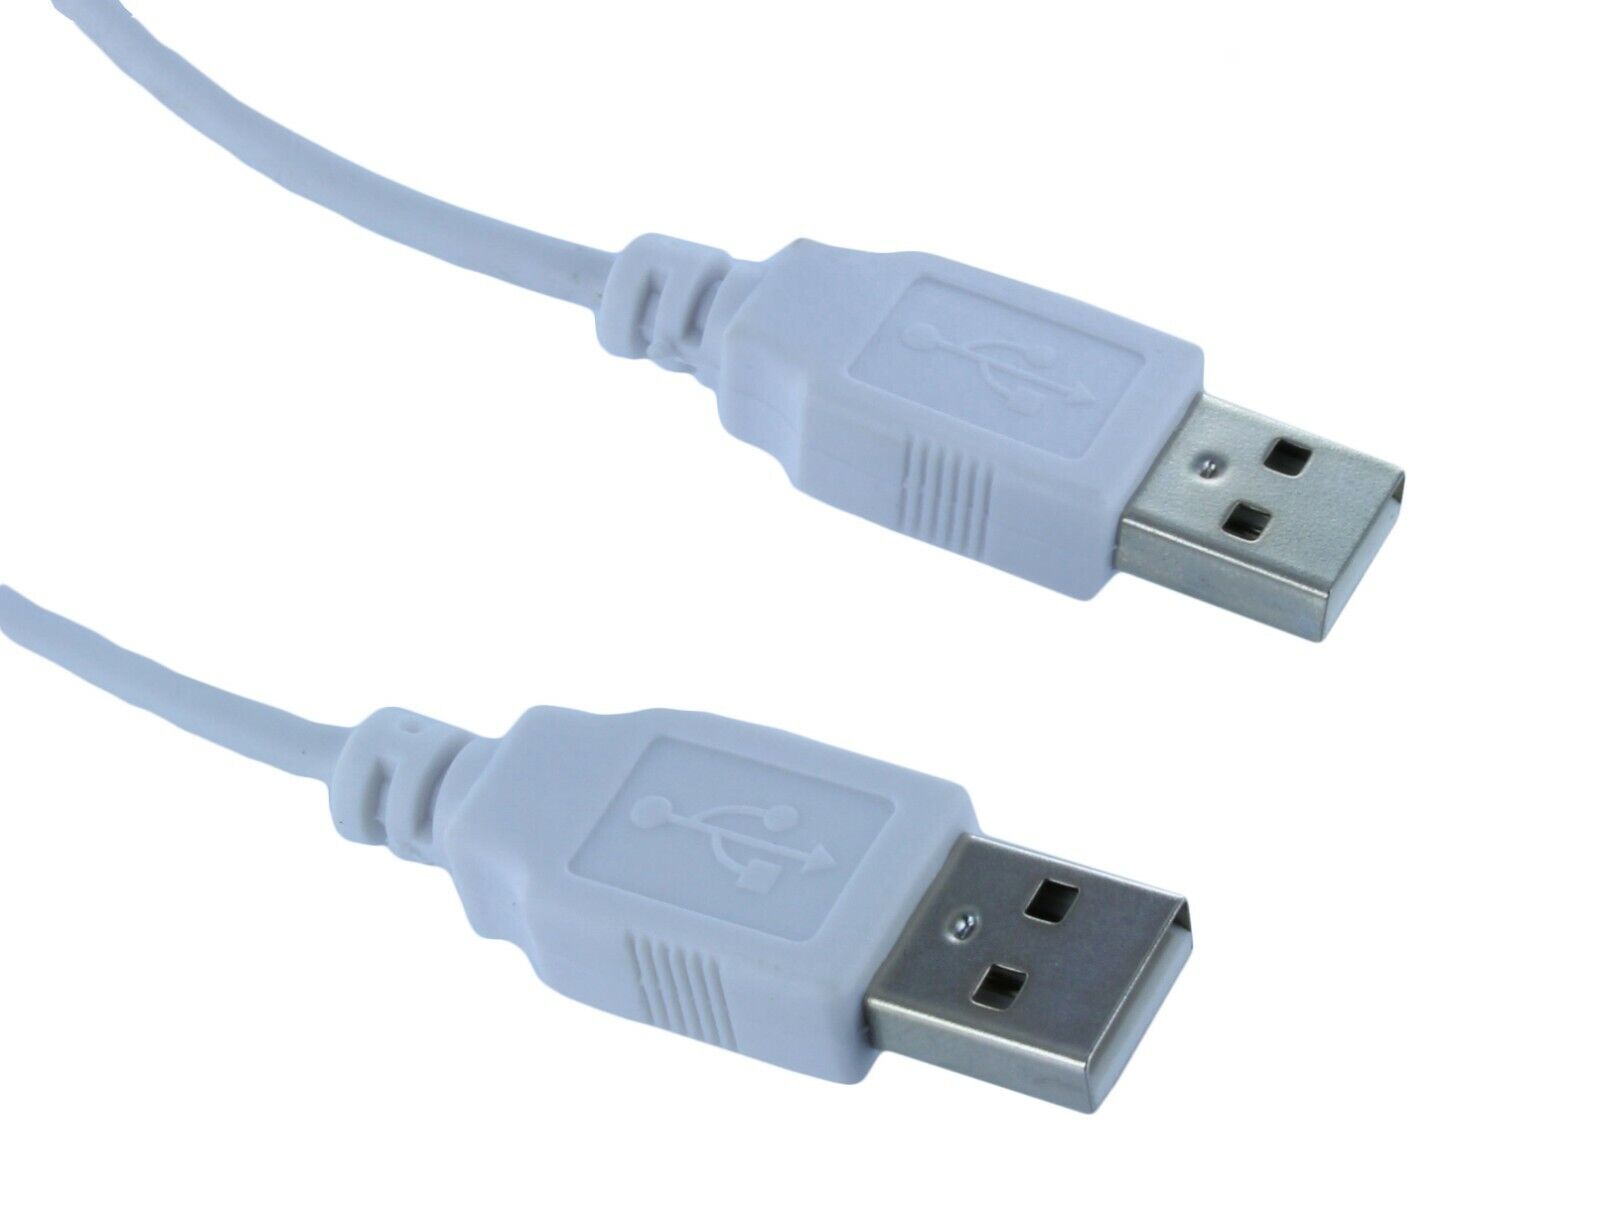 5 Pack 6Ft 6FEET USB2.0 Type A Male to Type A Male Cable Cord (U2A1-A1-06-5PK)